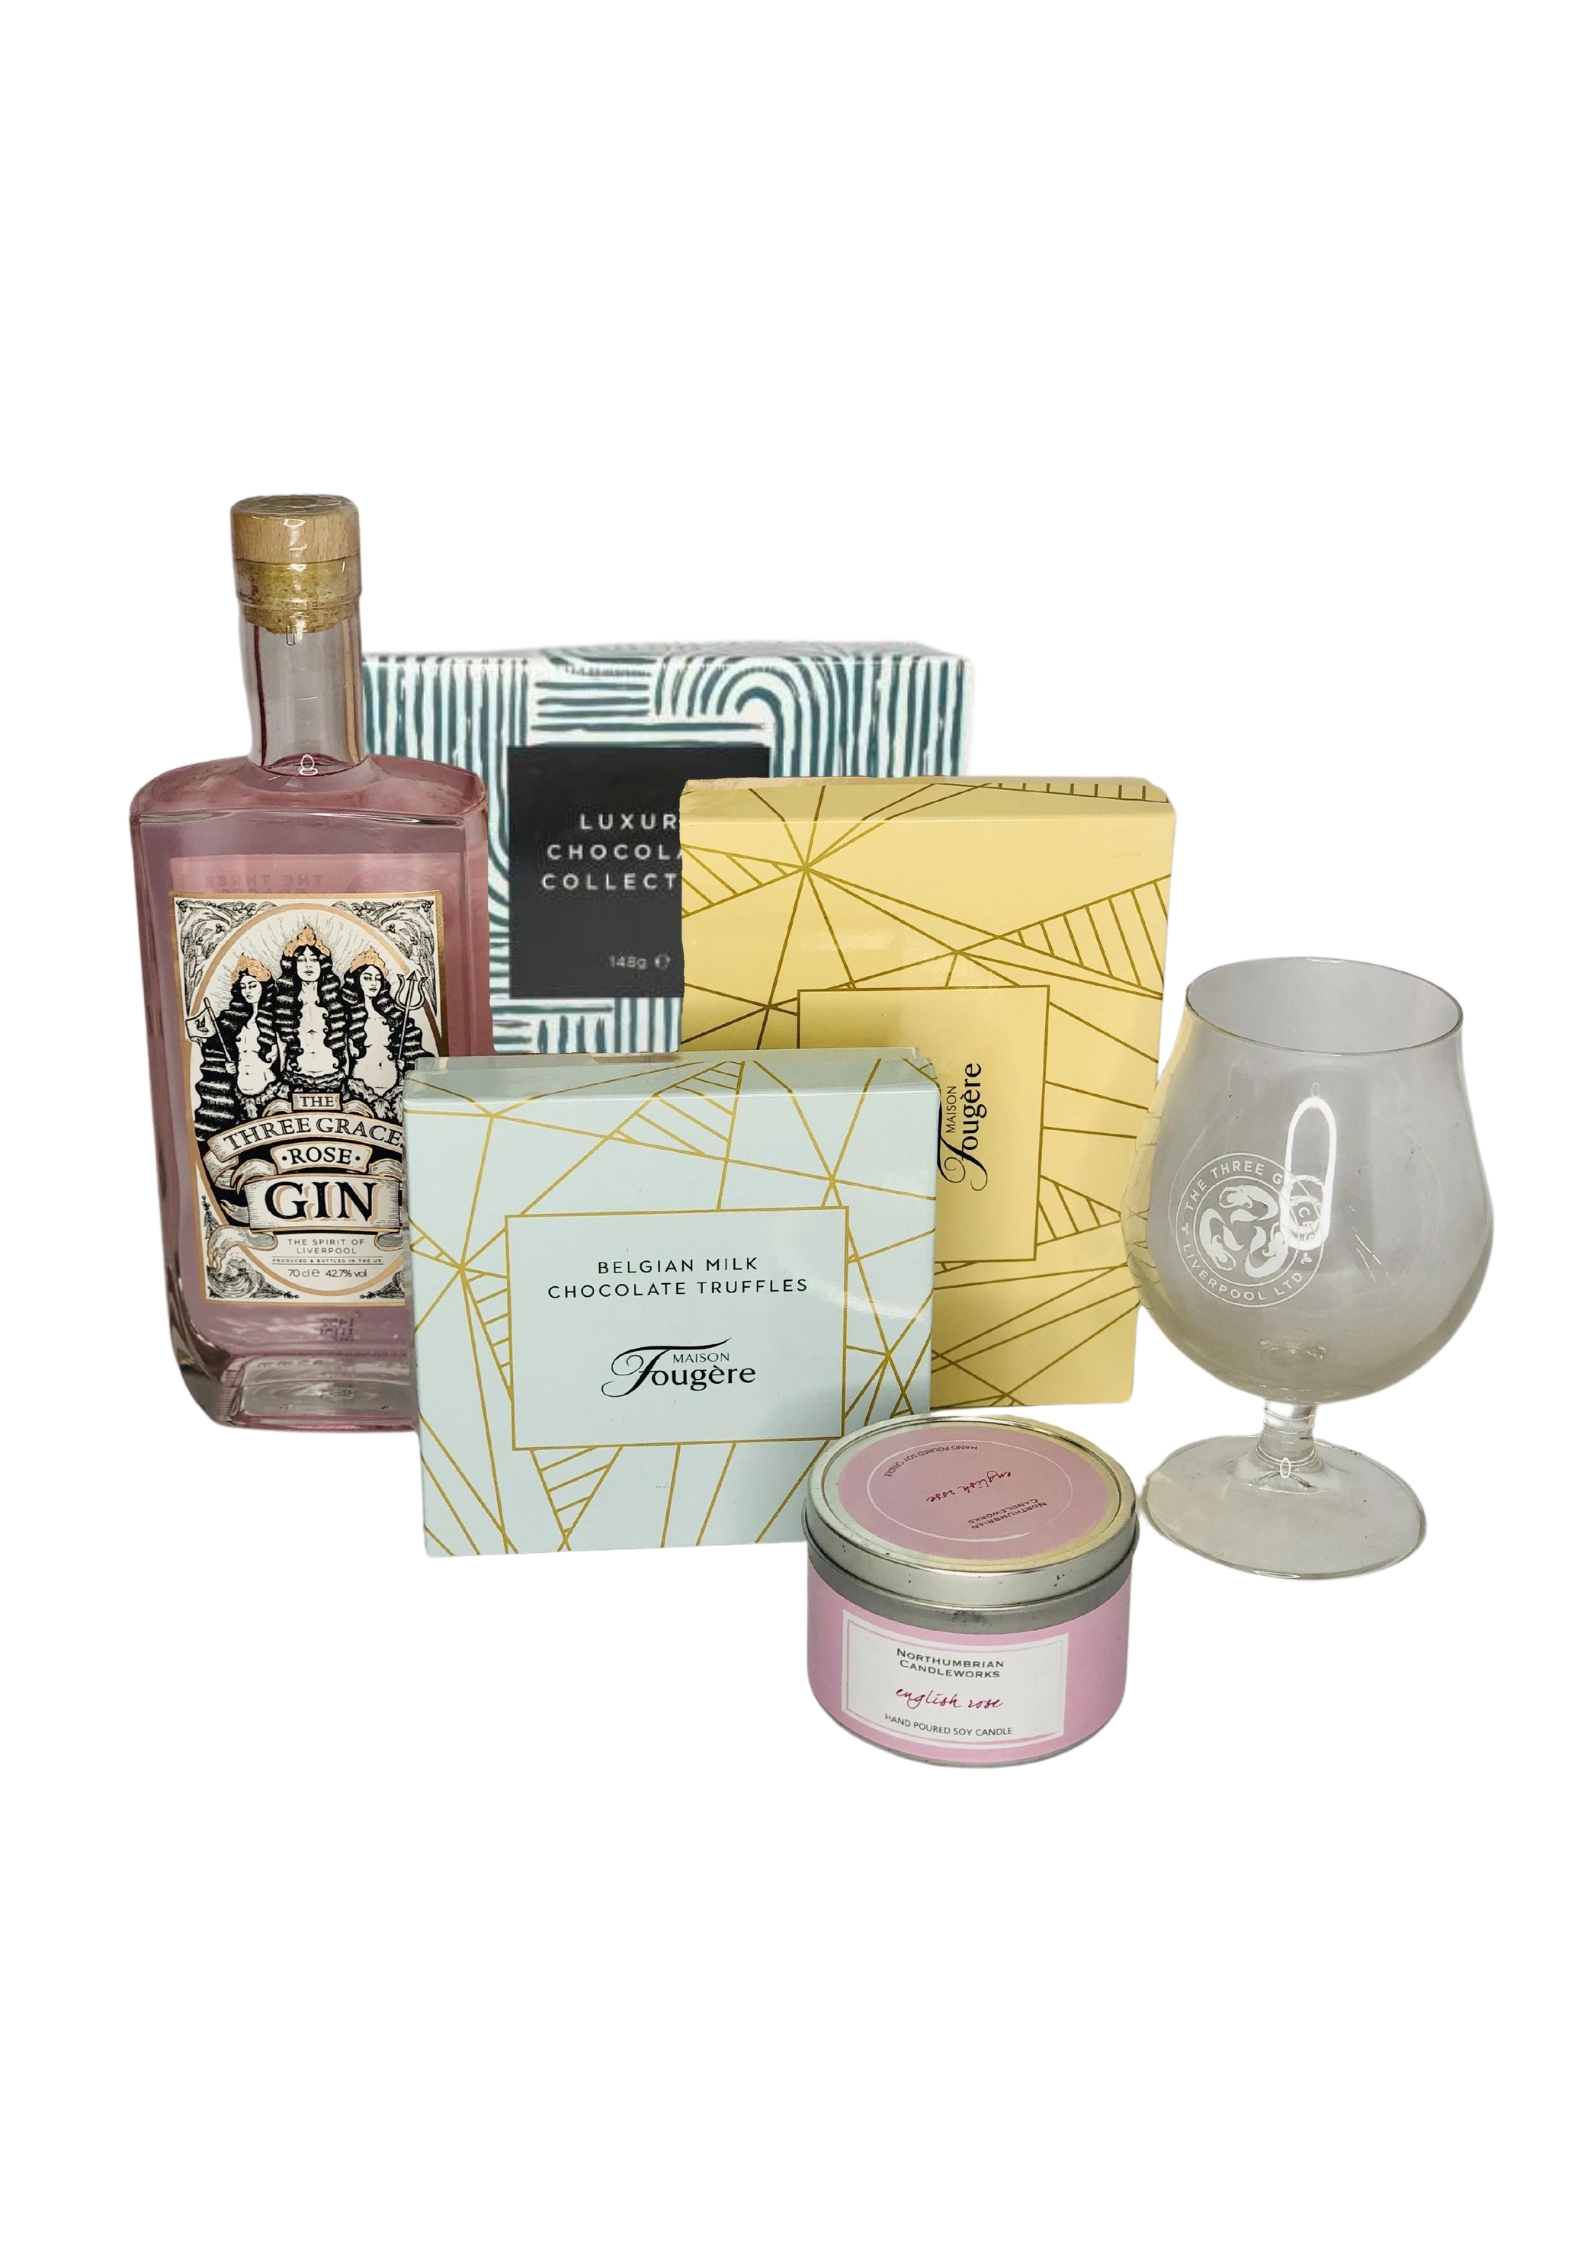 <p>Order this Rose Gin Gift Set to celebrate any occasion and you will not be disappointed.  Containing, a bottle of The Three Graces Rose Gin, together with a matching Three Graces Gin Glass, a trio of Maison Fougere Belgian Chocolates and an eco-friendly Soy Scented Candle beautifully presented in a stylish Gift Box.</p>
<br>
<h2>Gift Delivery Coverage</h2>
<p>Our shop delivers flowers and gifts to the following Liverpool postcodes L1 L2 L3 L4 L5 L6 L7 L8 L11 L12 L13 L14 L15 L16 L17 L18 L19 L24 L25 L26 L27 L36 L70 ONLY.  If your order is for an area outside unfortunately we cannot process your order because of the difference in stock at other florists.</p>
<br>
<h2>Alcohol Gifts</h2>
<p>As a licensed florist, we are able to supply alcoholic drinks either as a gift on their own or with flowers. We have carefully selected a range that we know you will love either as a gift in itself or to provide that extra bit of celebratory luxury to a floral gift.</p>
<p>This gift set contains alcohol from two locally-made companies - The Three Graces and Northumbrian Candleworks which are both made in Liverpool.</p>
<p>The bottle of Three Graces Rose Gin is made here in Liverpool and is paired with a matching Gin Glass.  Together with three boxes of Belgian Chocolates, including a box of 170g Maison Fougere Salted Caramels, a 140g Maison Fougere Belgian Truffles and a 115g Maison Fougere Belgian Chocolates. Finally, an eco-friendly Northumbrian Candleworks Scented Soy Candle in a stylish tin completes this Gin Gift Set.</p>
<p>Have this giftset delivered to someone special to celebrate as an alternative to having flowers delivered, or have it delivered with your flowers to really celebrate!</p>
<p>Rose Gin is brewed in Liverpool by The Three Graces and Northumbrian Candleworks are also made locally in Liverpool.</p>
<br>
<h2>Online Gift Ordering | Online Gift Delivery</h2>
<p>Through this website you can order 24 hours, Booker Gifts and Gifts Liverpool have put together this carefully selected range of Flowers, Gifts and Finishing Touches to make Gift ordering as easy as possible. This means even if you do not live in Liverpool we make it easy for you to see what you are getting when buying for delivery in Liverpool.</p>
<br>
<h2>Liverpool Flower and Gift Delivery</h2>
<p>We are open 7 days a week and offer advanced booking flower delivery, same-day flower delivery, Guaranteed AM Flower Delivery and also offer Sunday Flower Delivery.</p>
<p>Our florists Deliver in Liverpool and can provide flowers for you in Liverpool, Merseyside. And through our network of florists can organise flower deliveries for you nationwide.</p>
<br>
<h2>Beautiful Gifts Delivered | Best Florist in Liverpool</h2>
<p>Having been nominated the Best Florist in Liverpool by the independent Three Best Rated for the 5th year running you can feel secure with us</p>
<p>You can trust Booker Gifts and Gifts to deliver the very best for you.</p>
<br>
<h2>5 Star Google Review</h2>
<p><em>So Pleased with the product and service received. I am working away currently, so ordered online, and after my own misunderstanding with online payment, I contacted the florist directly to query. Gemma was very prompt and helpful, and my flowers were arranged easily. They arrived this morning and were as impactful as the pictures on the website, and the quality of the flowers and the arrangement were excellent. Great Work! David Welsh</em></p>
<br>